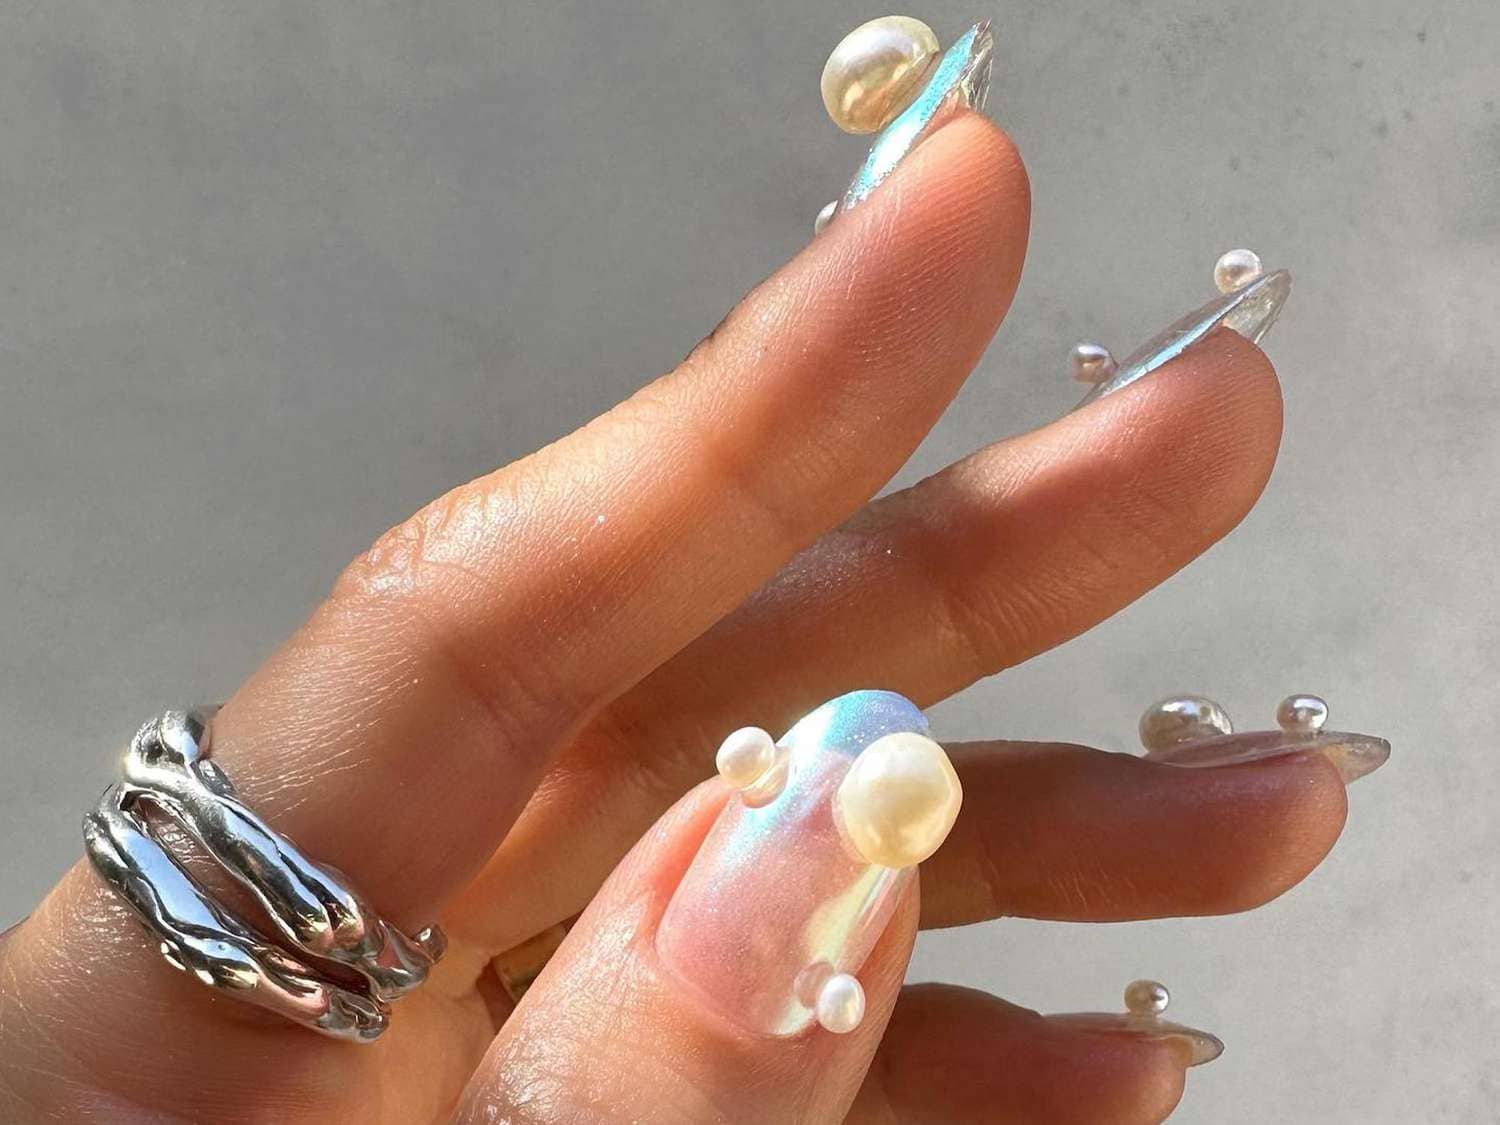 Sea Pearl Charms On Nails